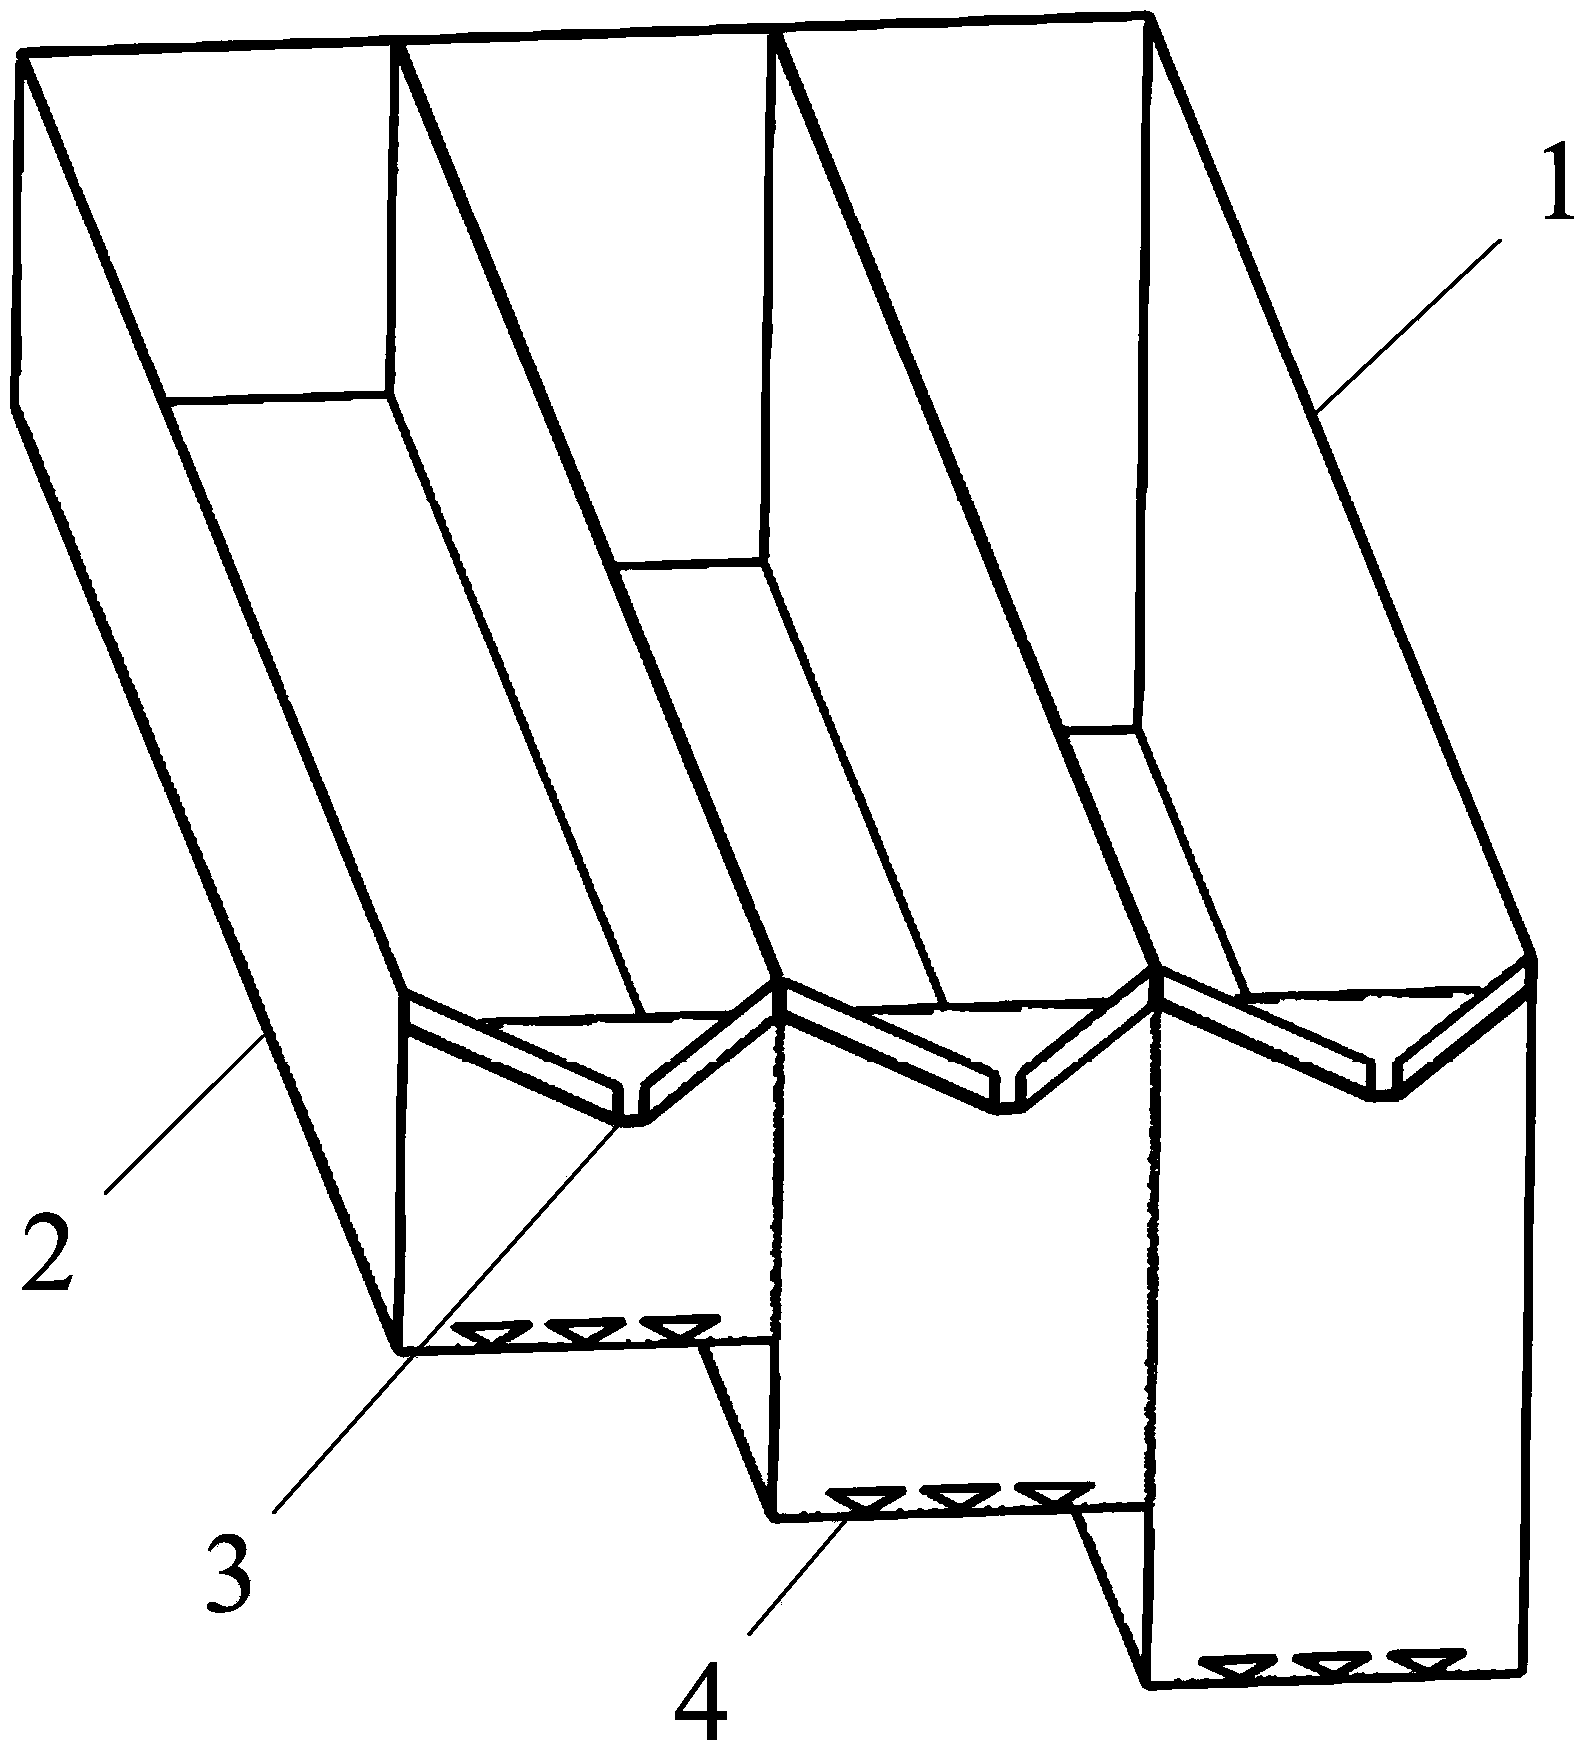 Device and method for monitoring runoffs and infiltration characteristics of slope change soil